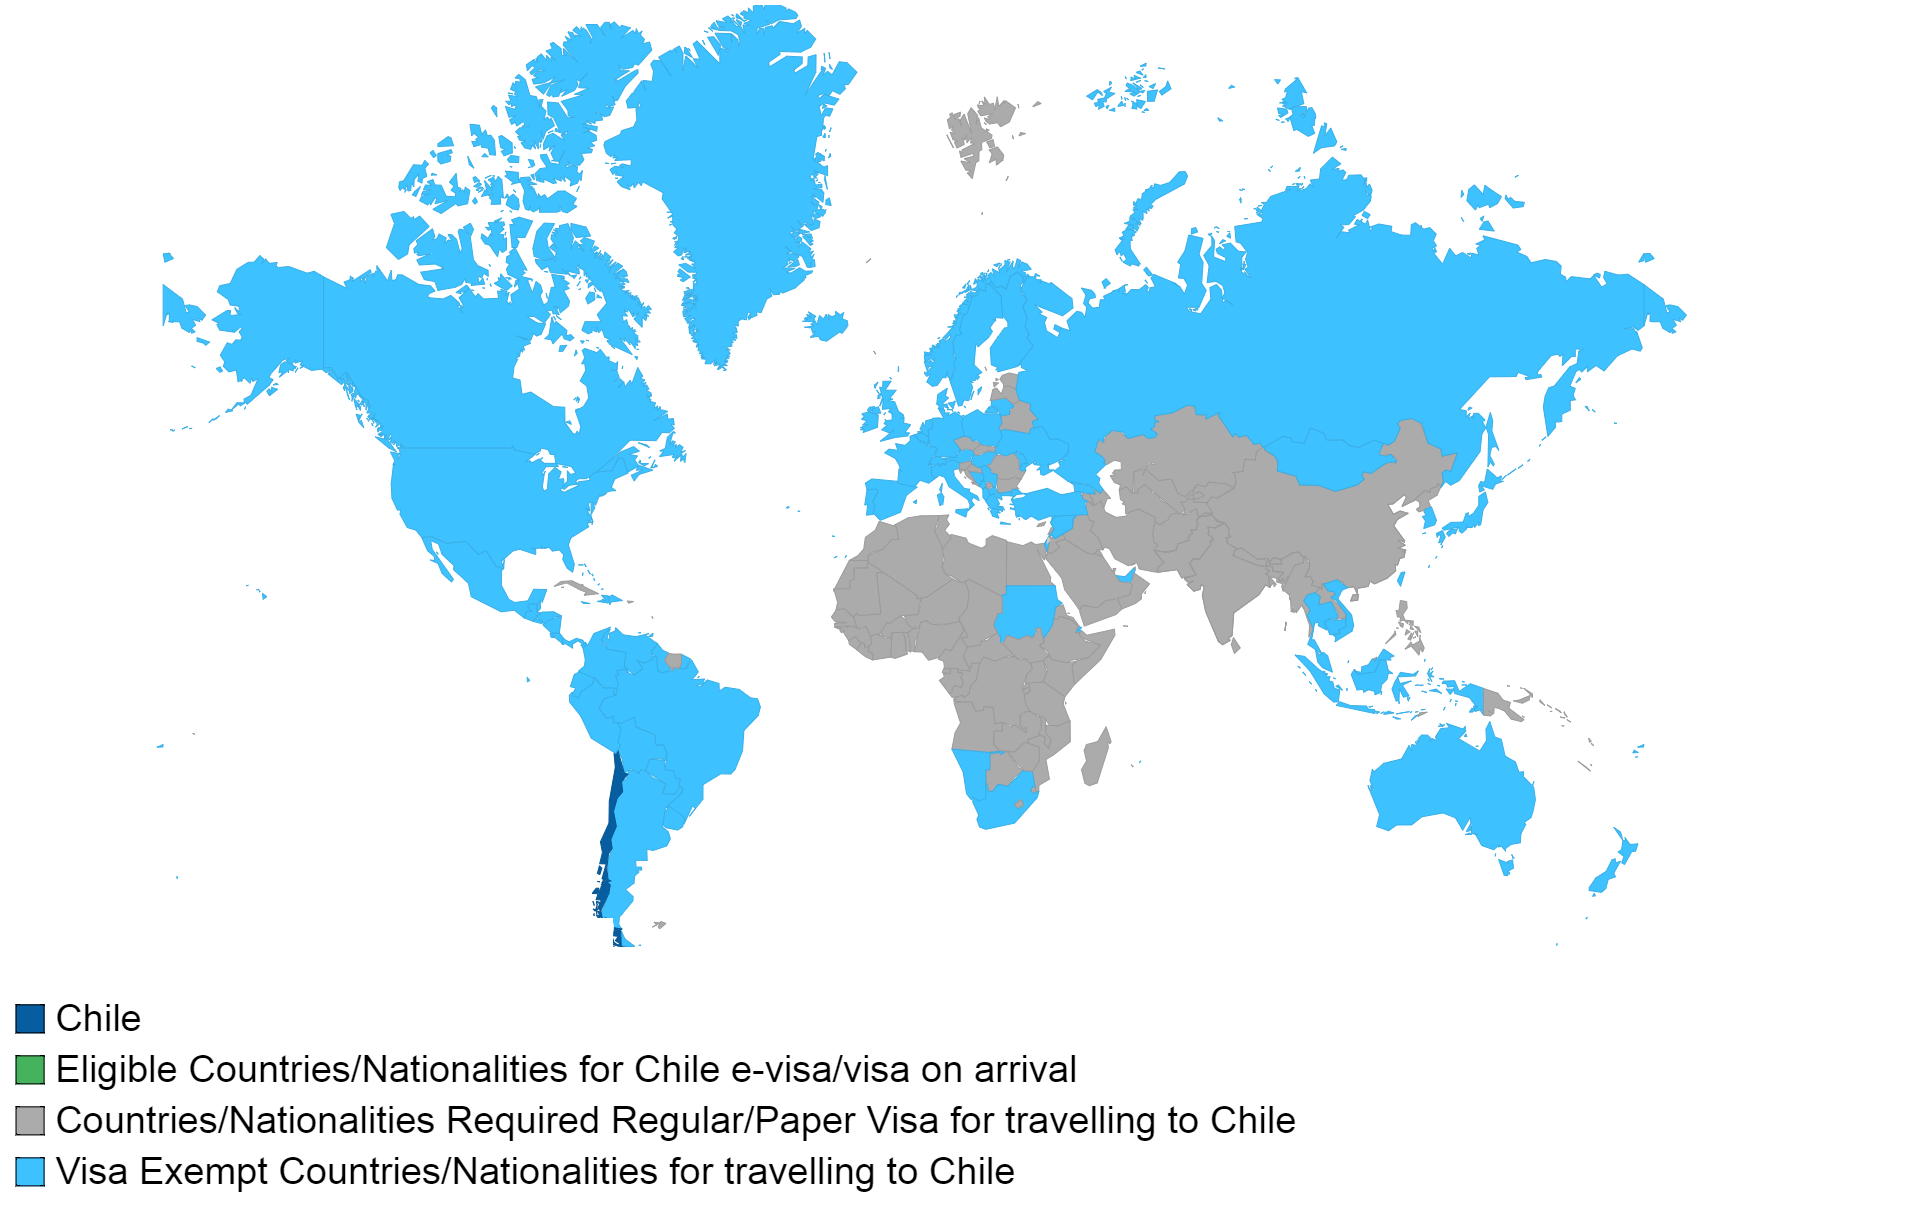 Categories of Visas in Chile